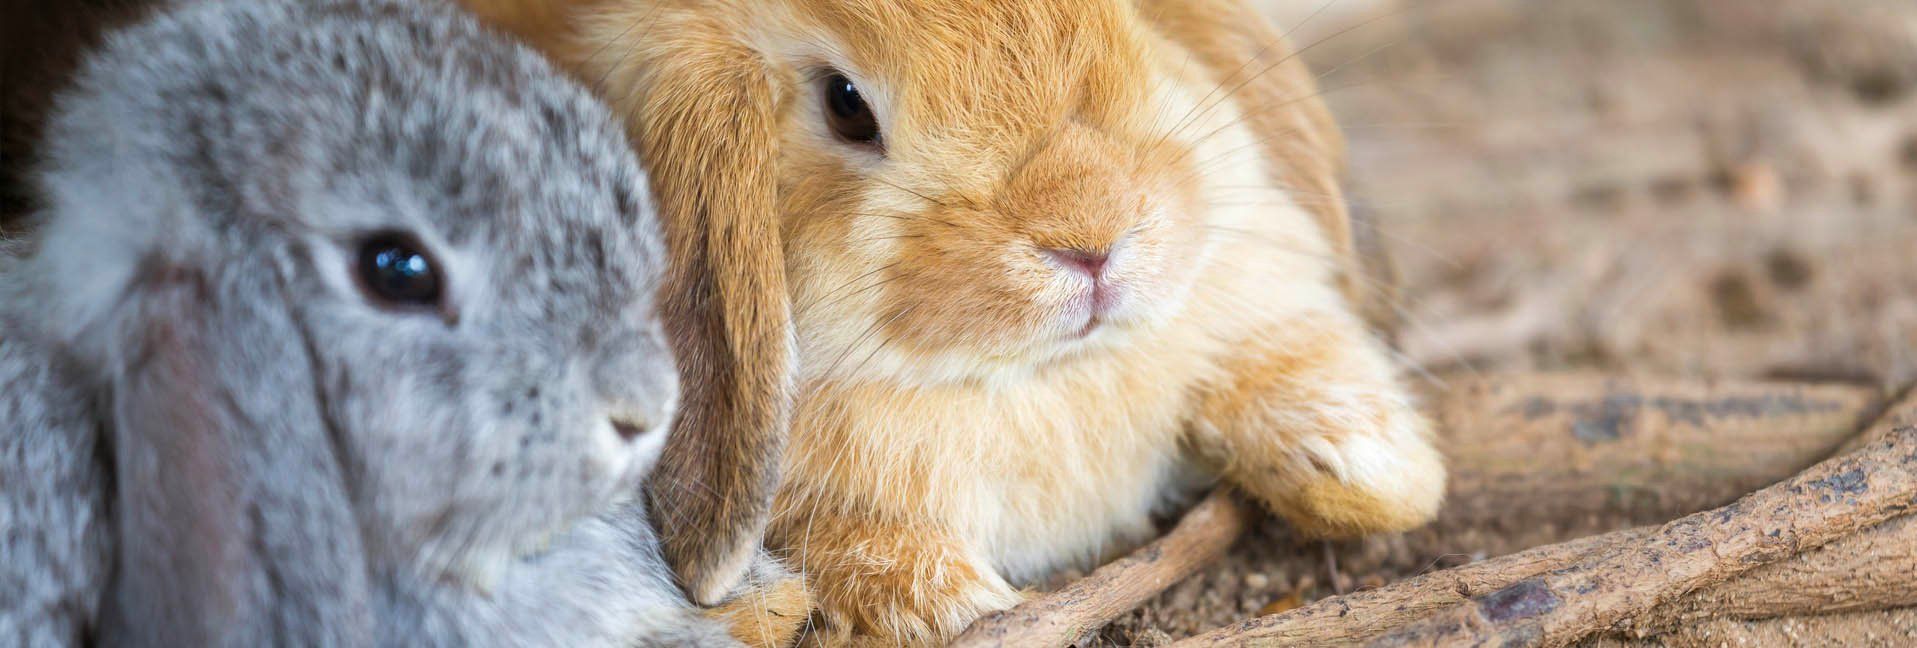 Dutch Treats - The Endearing Holland Lop